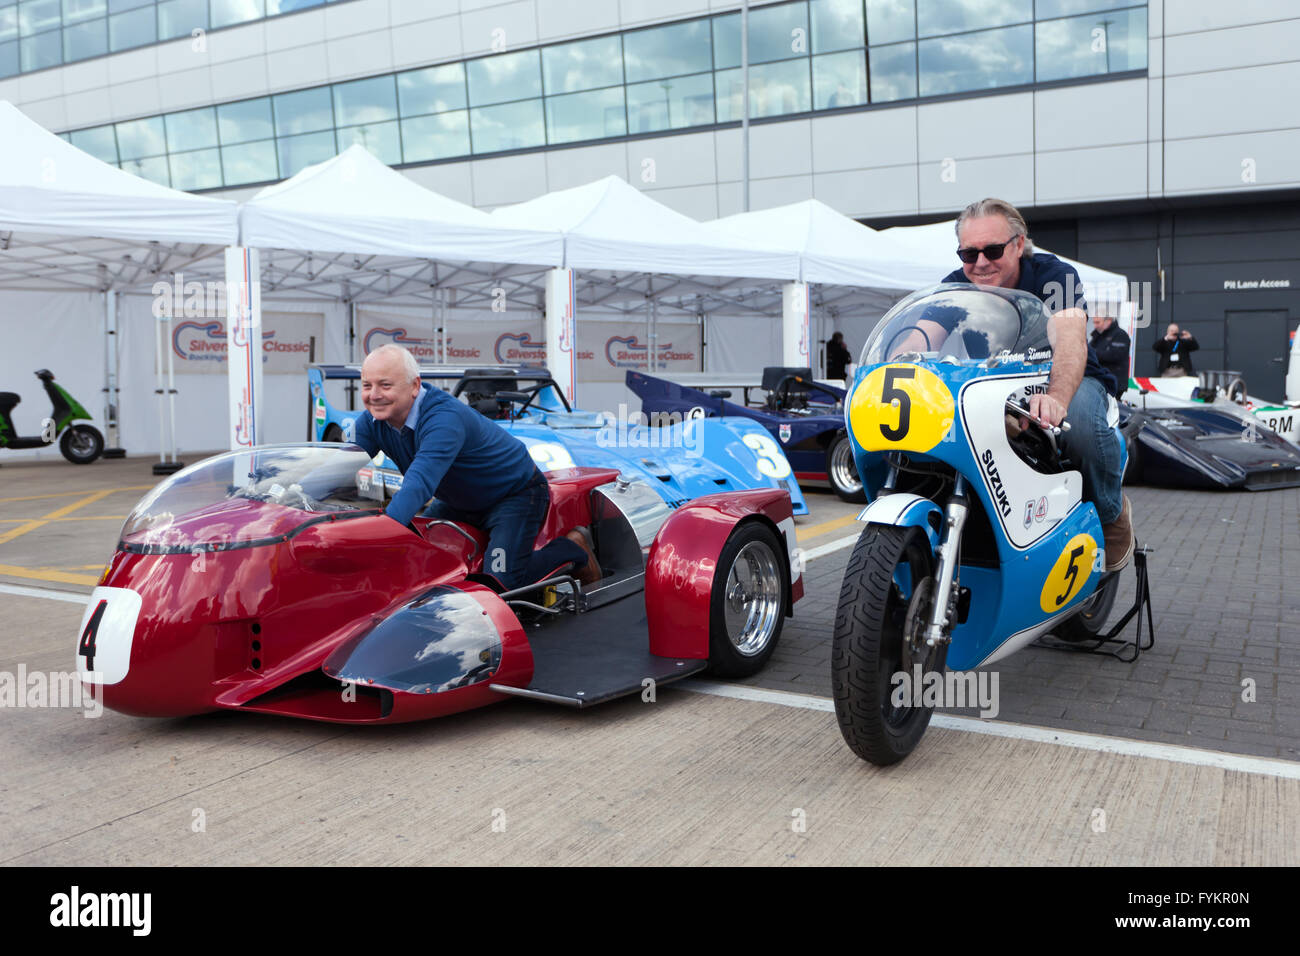 500cc World Champion, Wayne Gardner and Sidecar legend,  Steve Webster was at Silverstone today to announce two very special additions to the Silverstone Classic 2016 line-up: World GP Bike Legends and the Sidecar Salute! Stock Photo